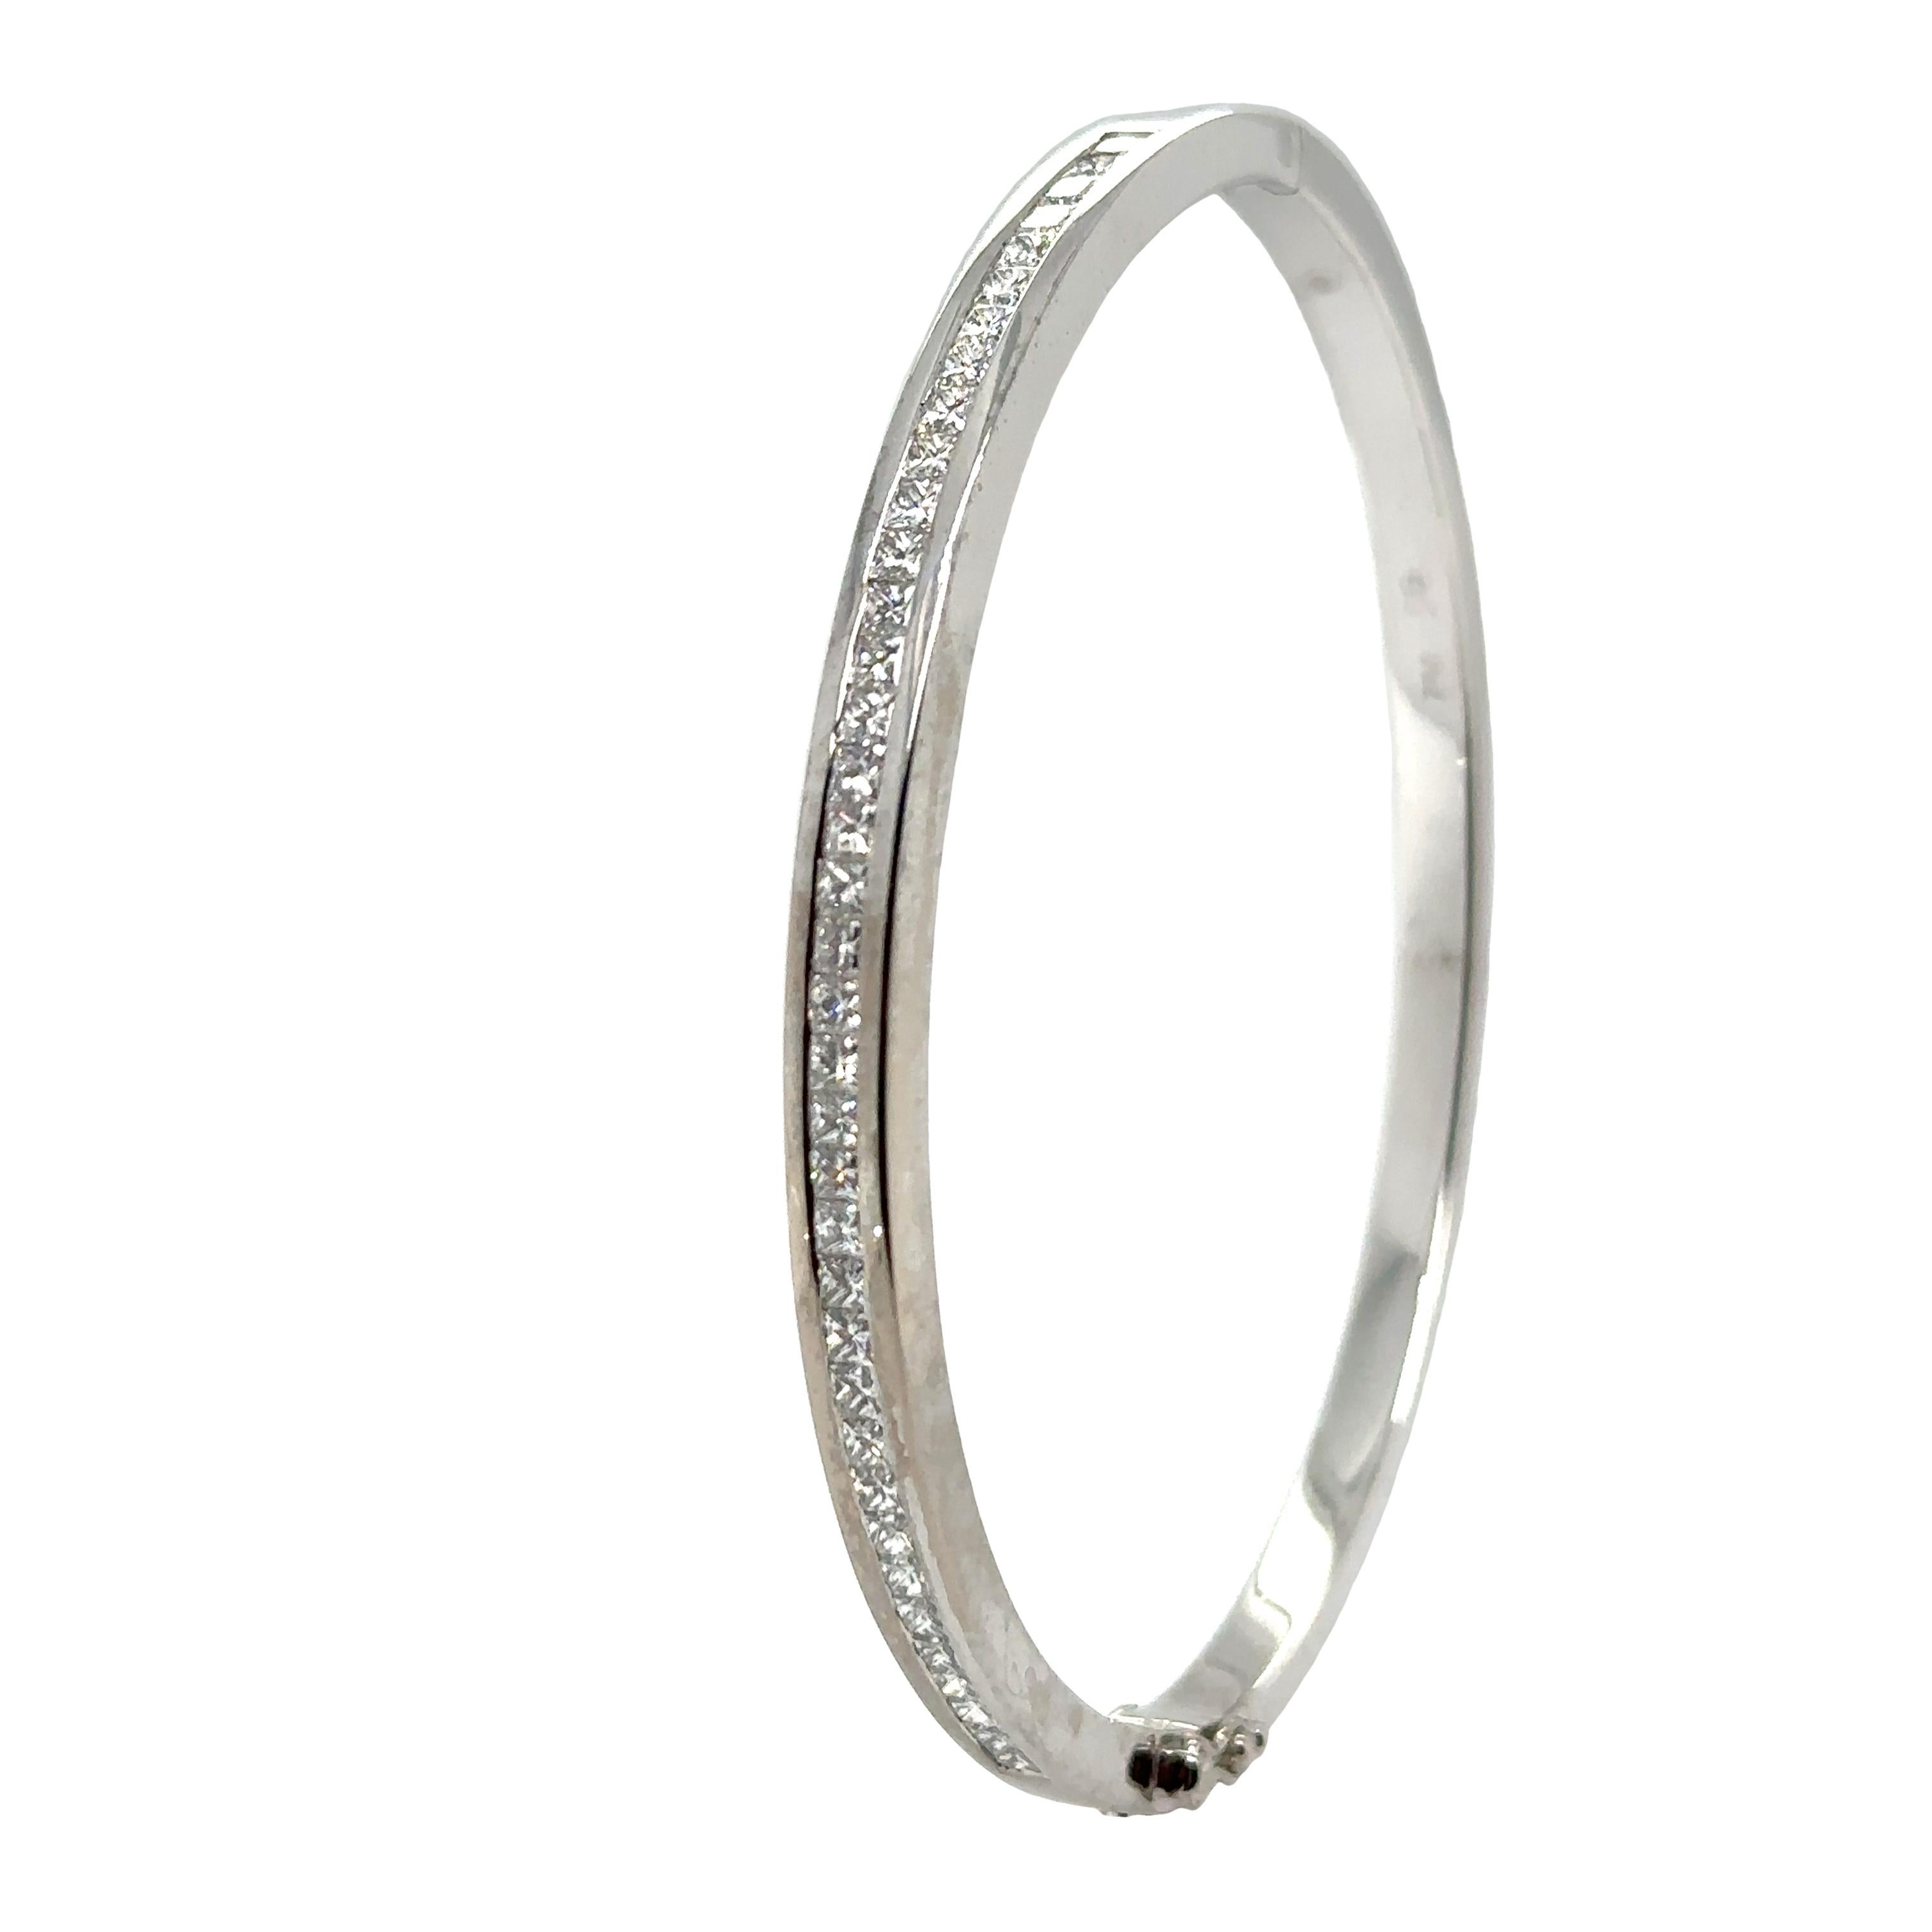 Unique features:

A Diamond Hinged Line Bangle with 37 princess cut diamonds channel set in 18ct white gold.

37 Diamonds = 1.85ct (estimated), Graded in setting as Colour: F, Clarity: VS

Weight 26.75 grams.

Metal: 18ct White Gold
Carat: